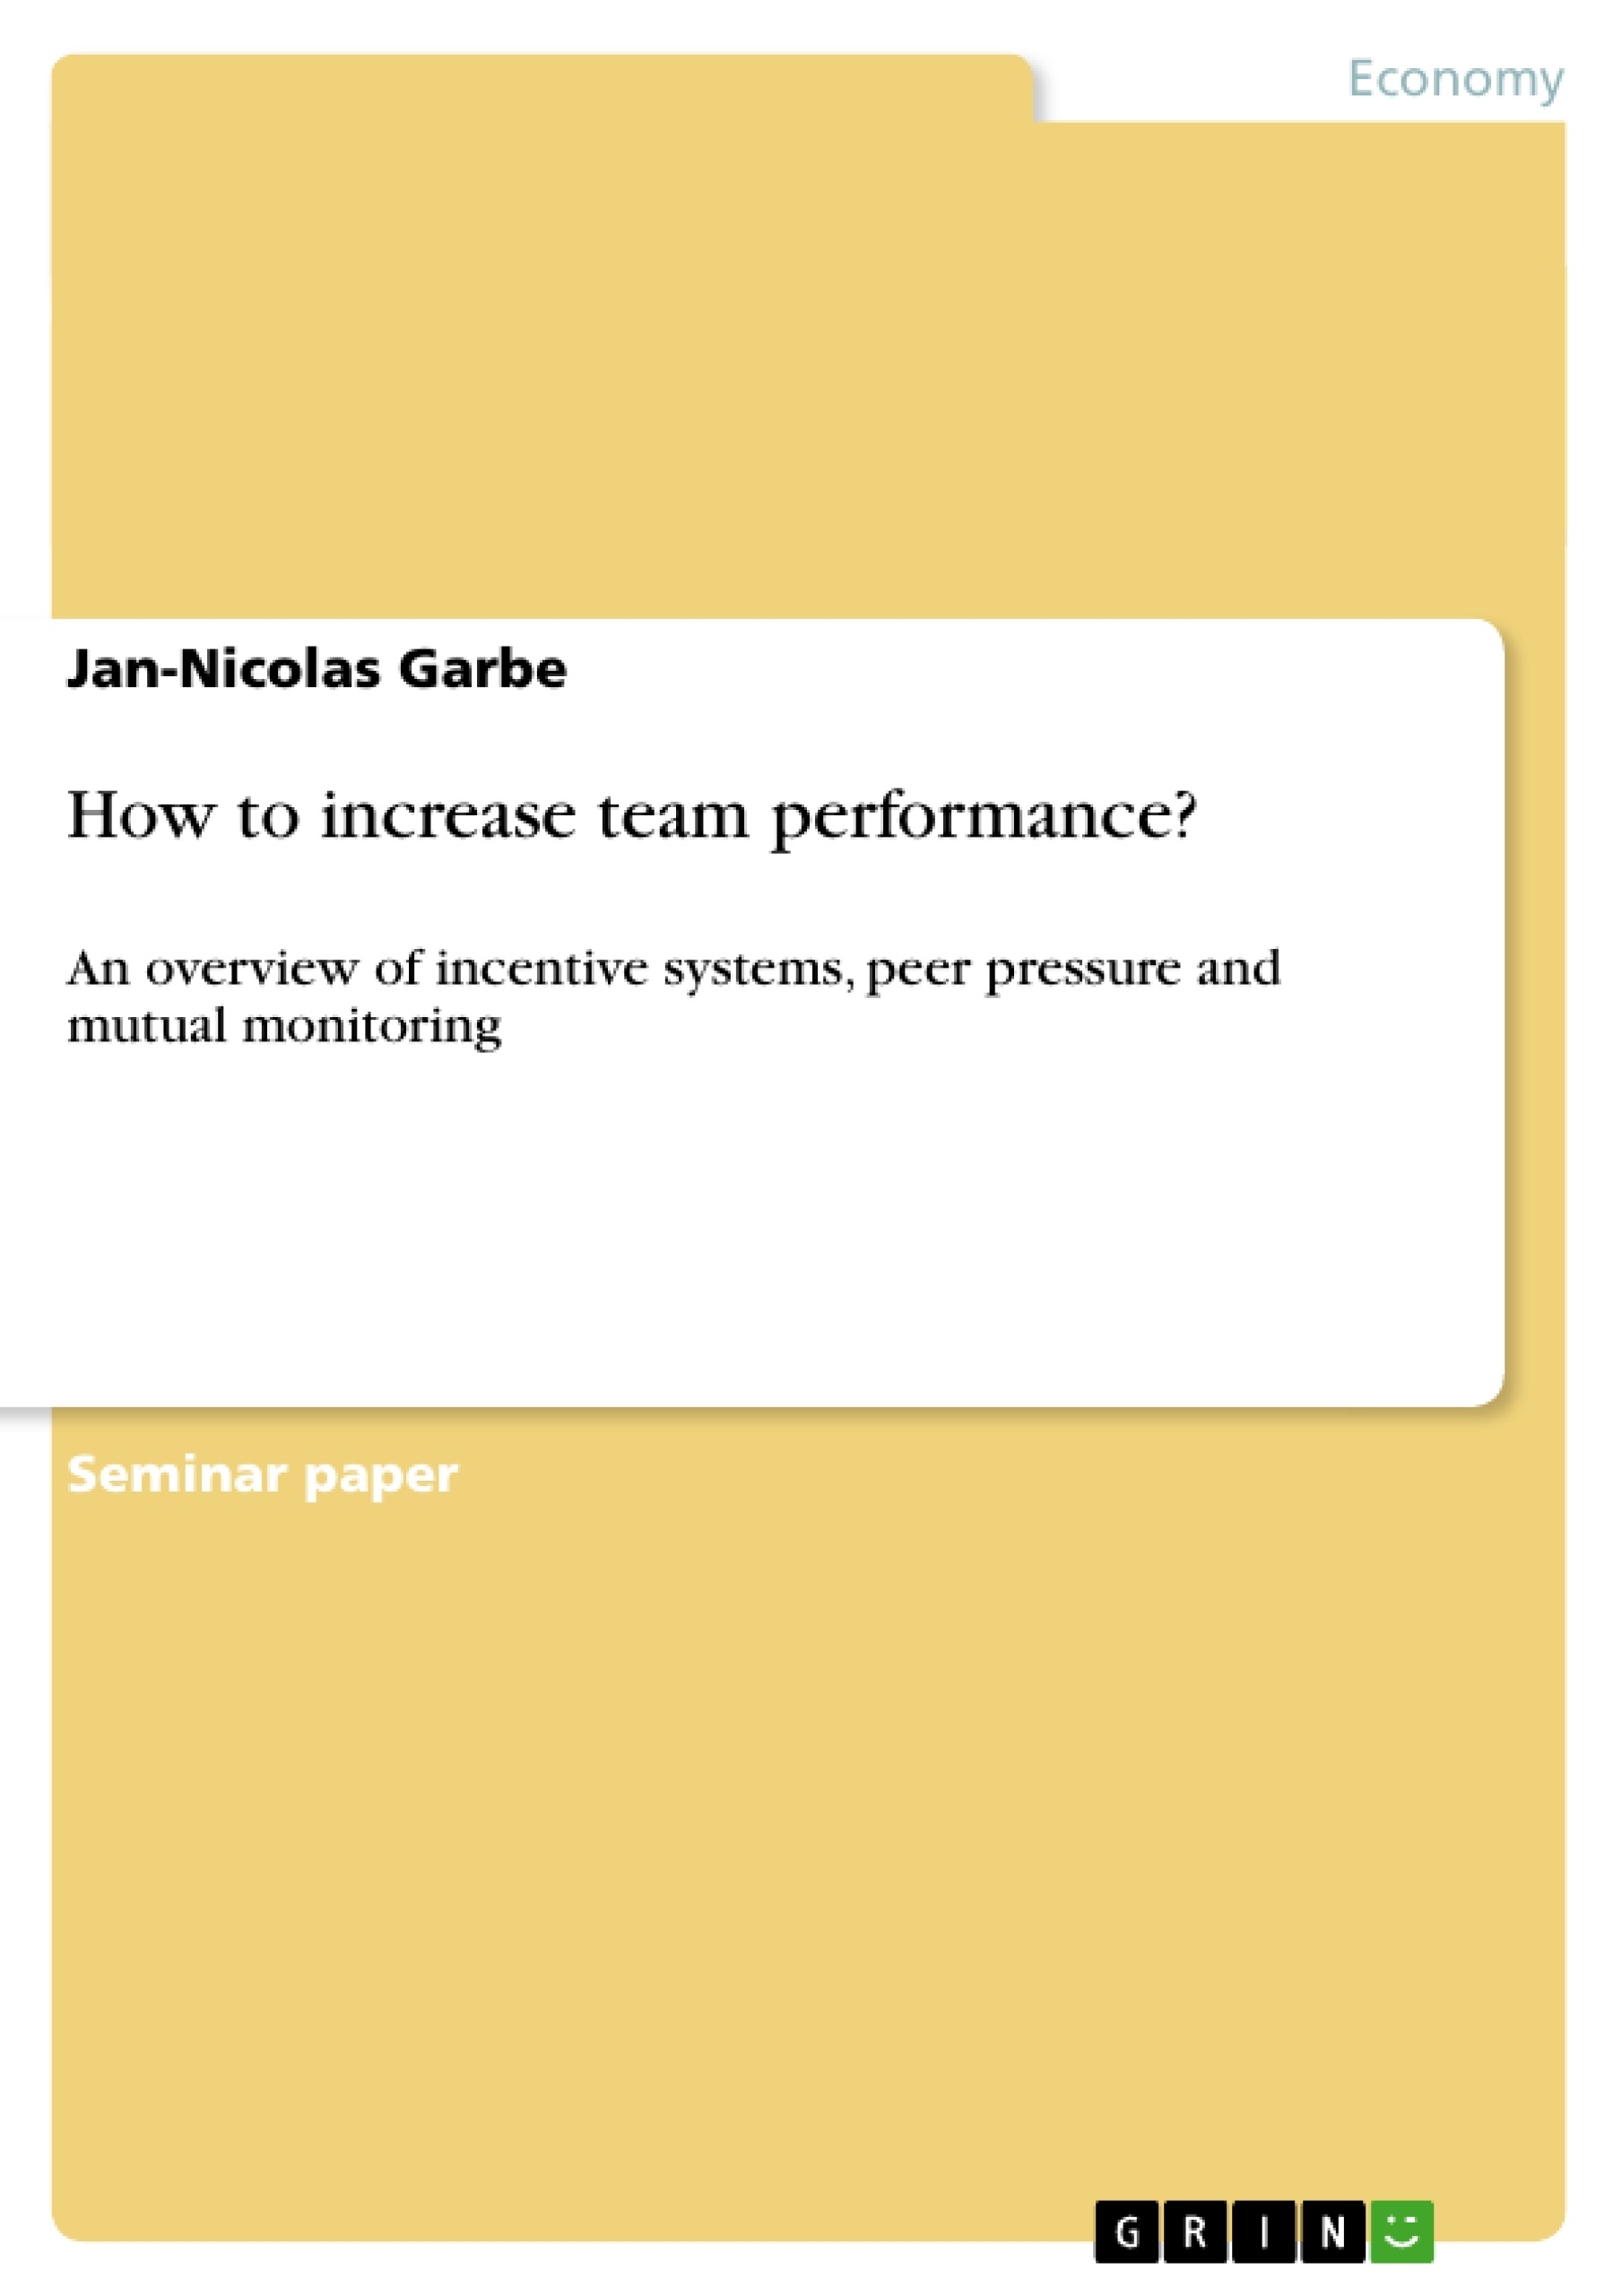 Title: How to increase team performance?